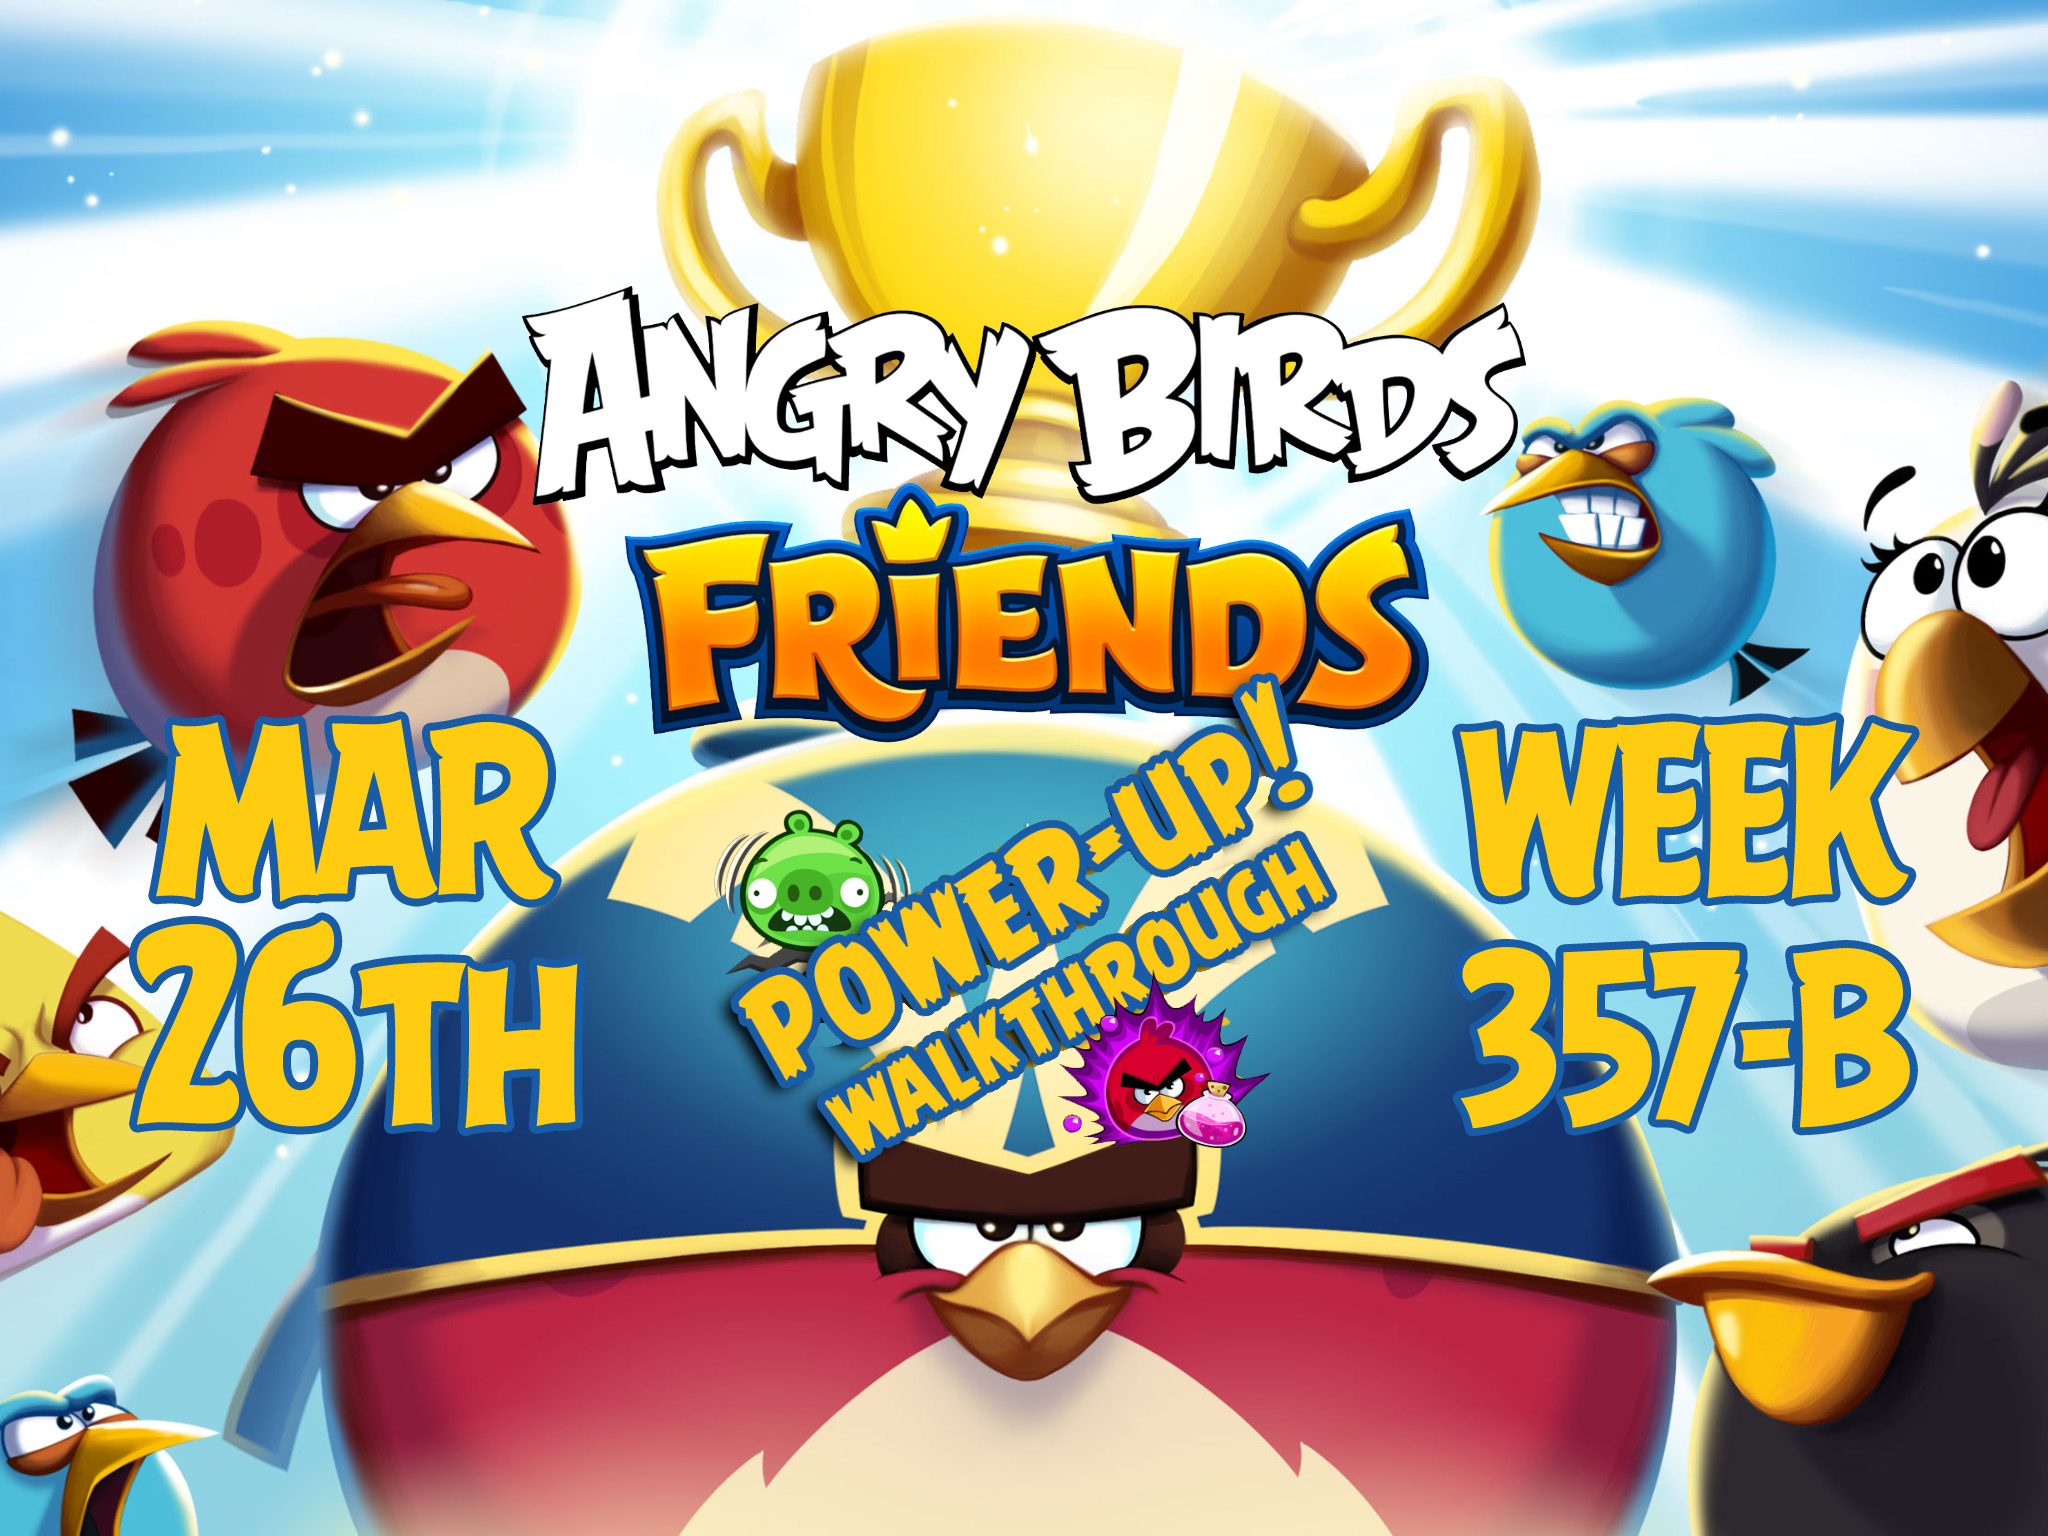 Angry-Birds-Friends-Tournament-Week-357-B-Feature-Image-PU